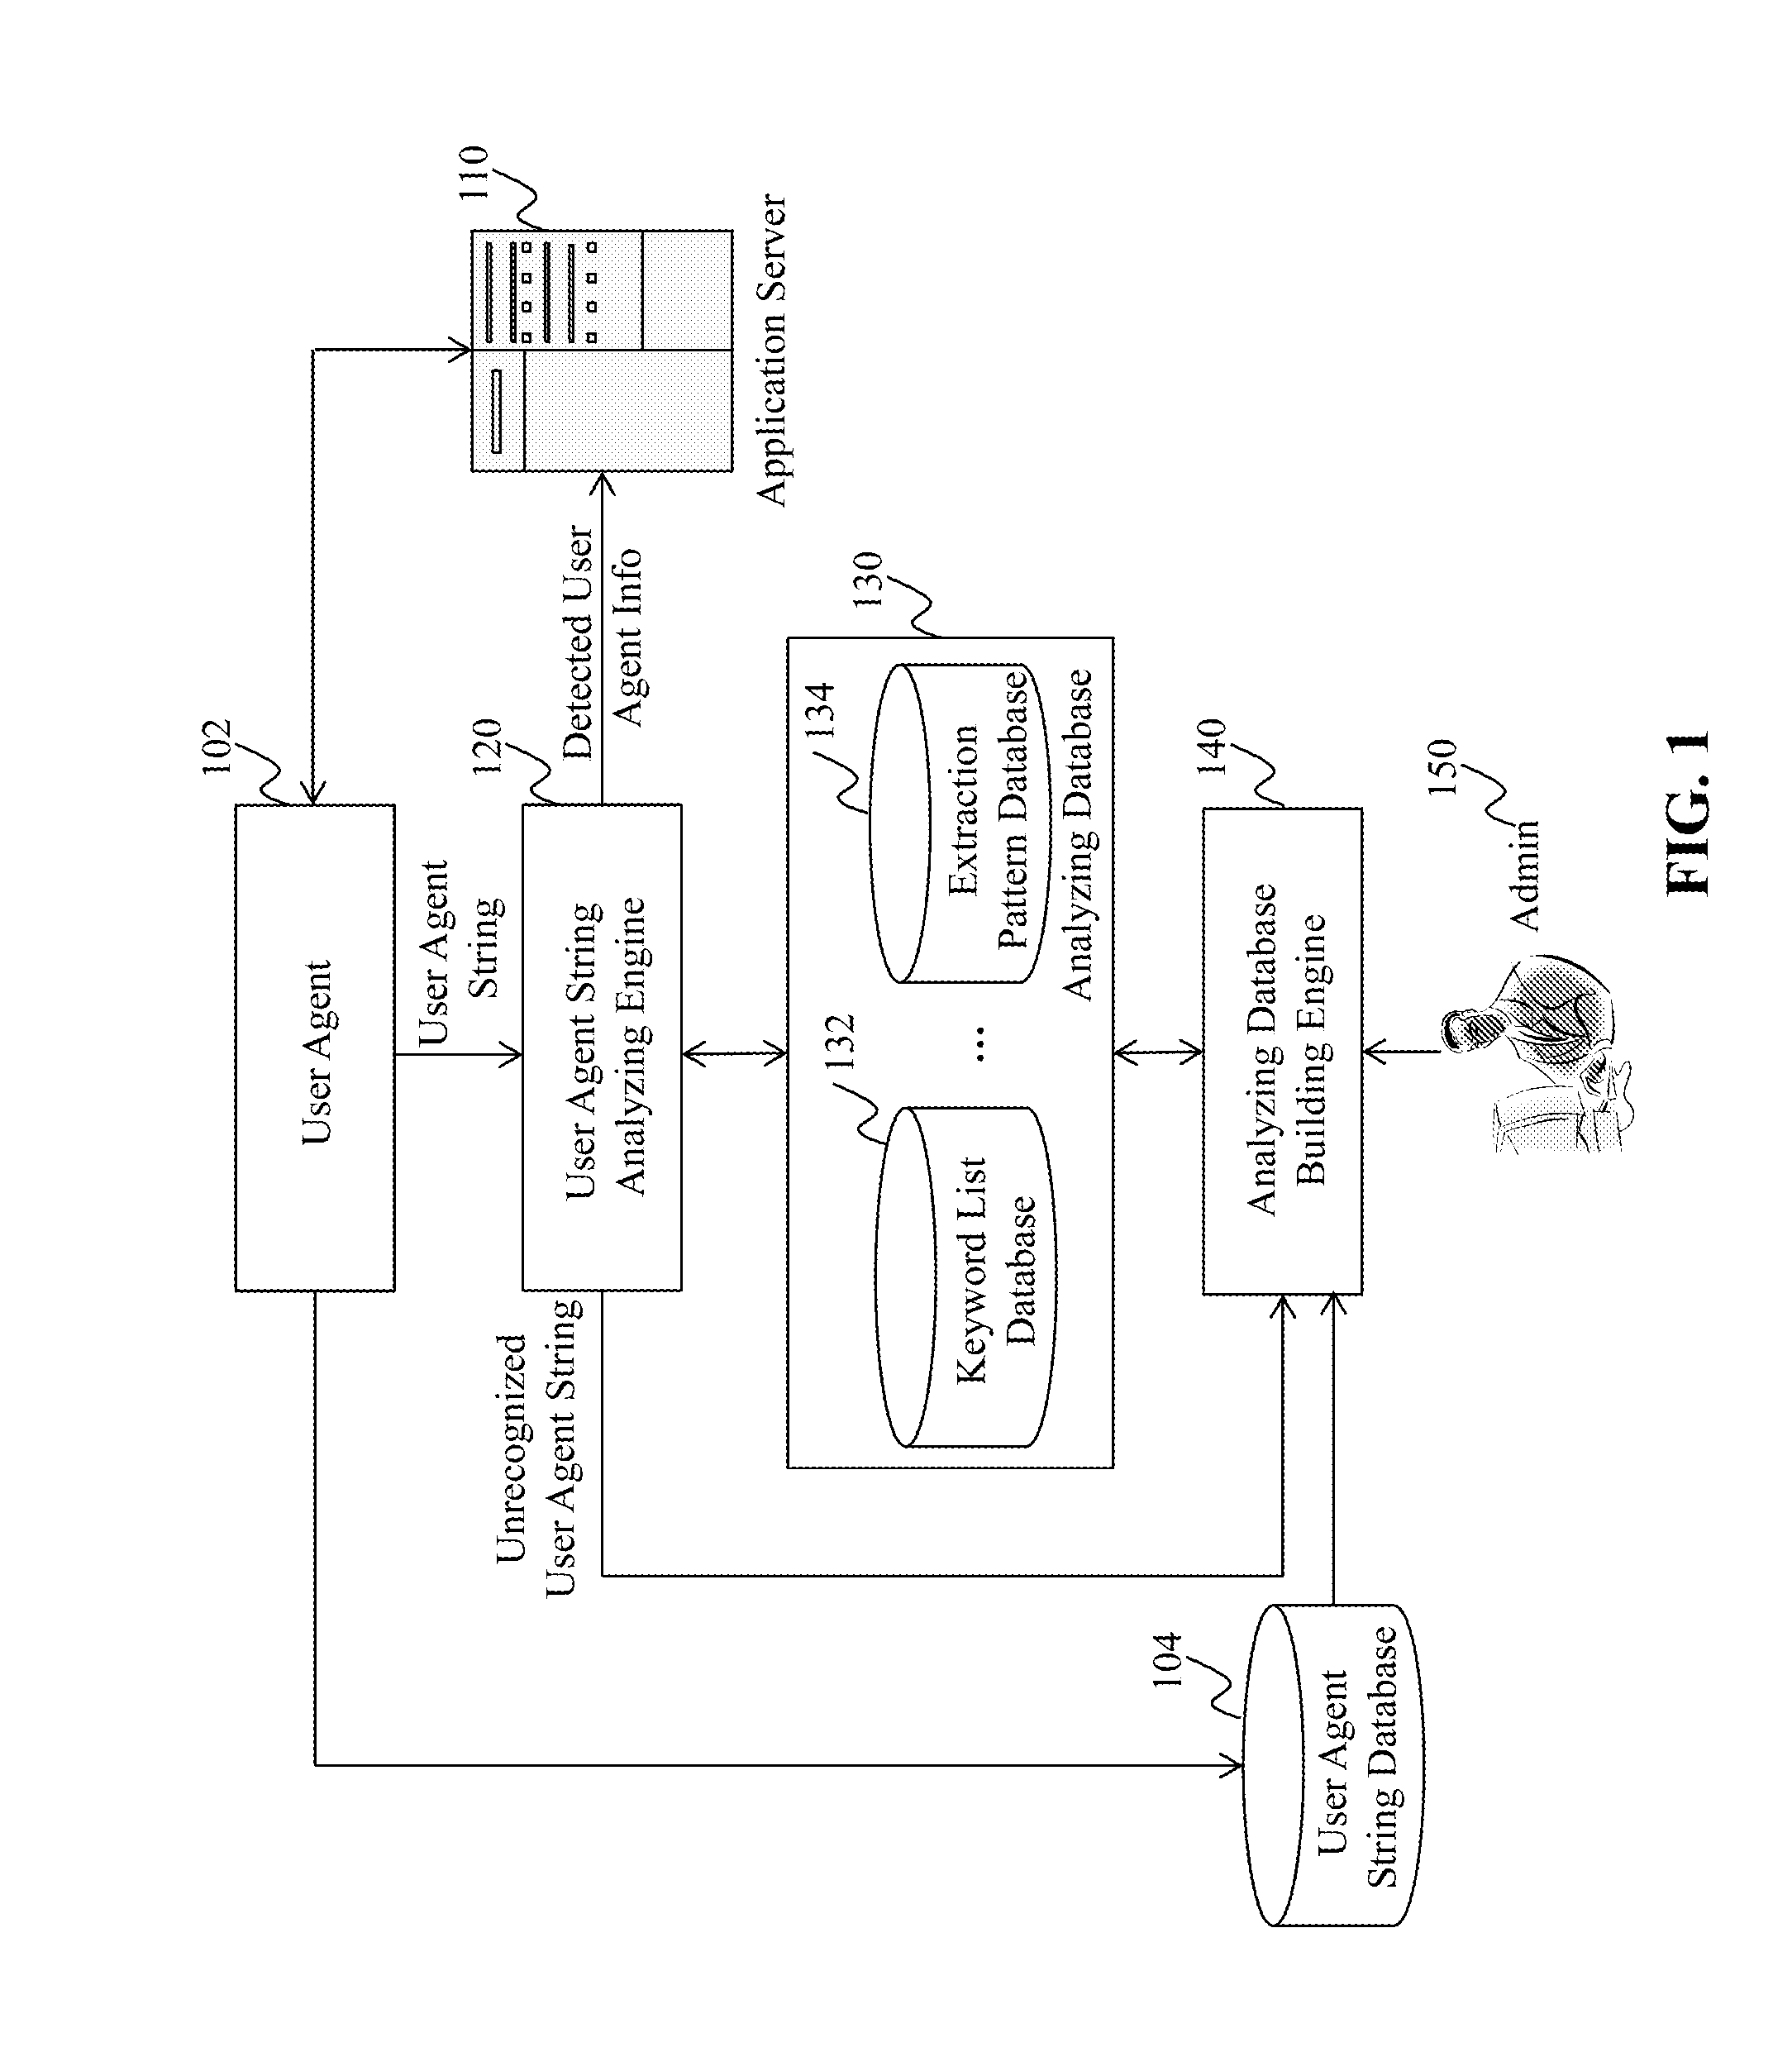 Method and System for Providing a User Agent String Database